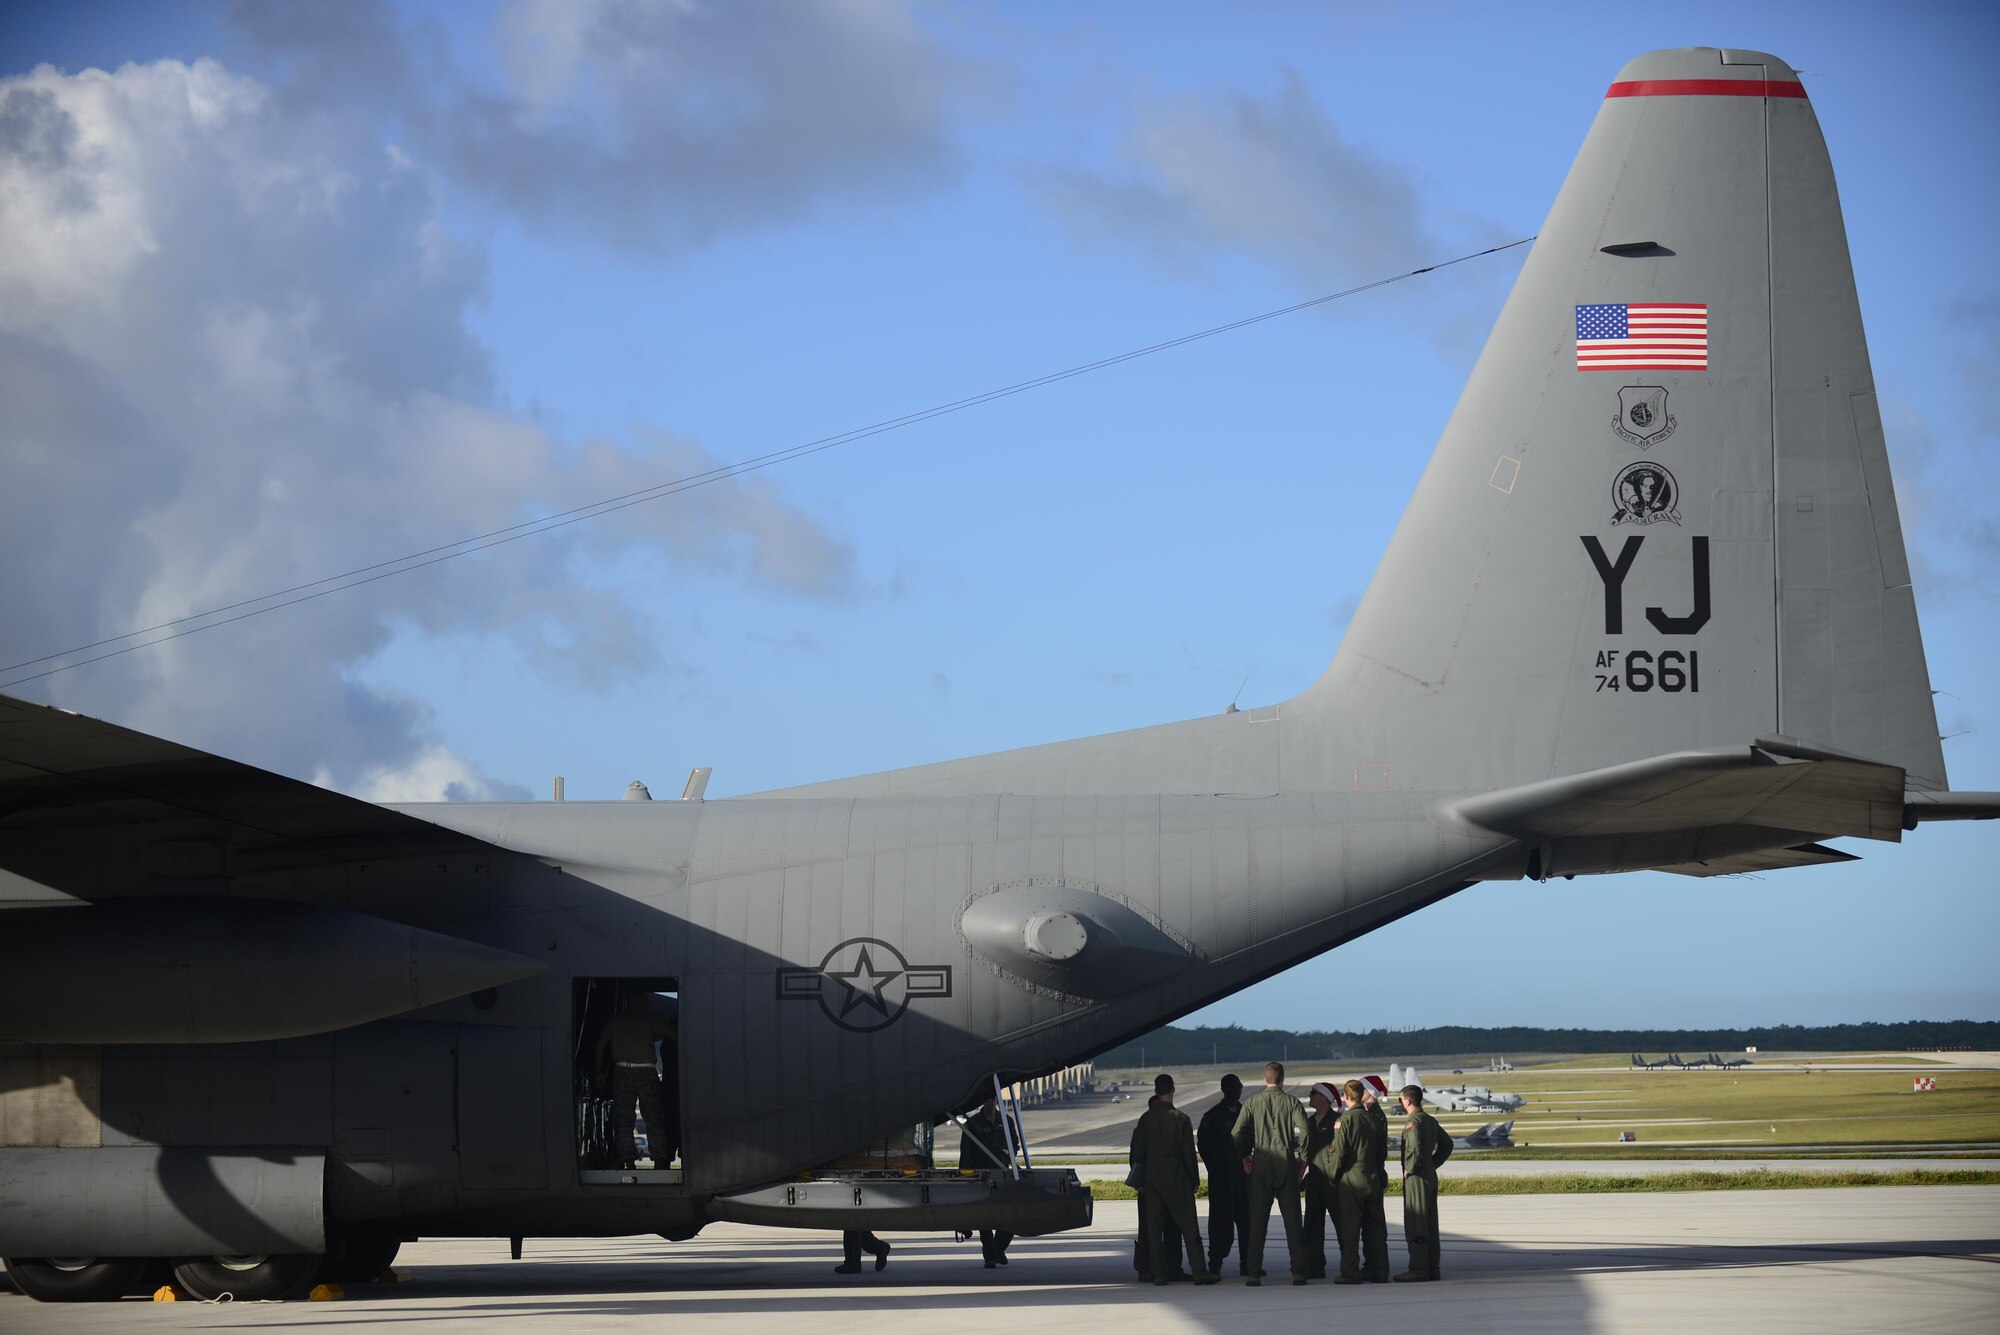 A C-130 Hercules crew from the 36th Airlift Squadron prepares for an airdrop mission during Operation Christmas Drop at Andersen Air Force Base, Guam, Dec. 11, 2013. This year marks the 62nd year of Operation Christmas Drop, which began in 1952, making it the world's longest running airdrop mission. Every December, C-130 Hercules crews from the 374th Airlift Wing at Yokota Air Base, Japan, partner with the 36th Wing at Andersen Air Force Base, Guam, to airlift food, supplies and toys to islanders throughout Micronesia. (U.S. Air Force photo/2nd Lt. Jake Bailey) 

